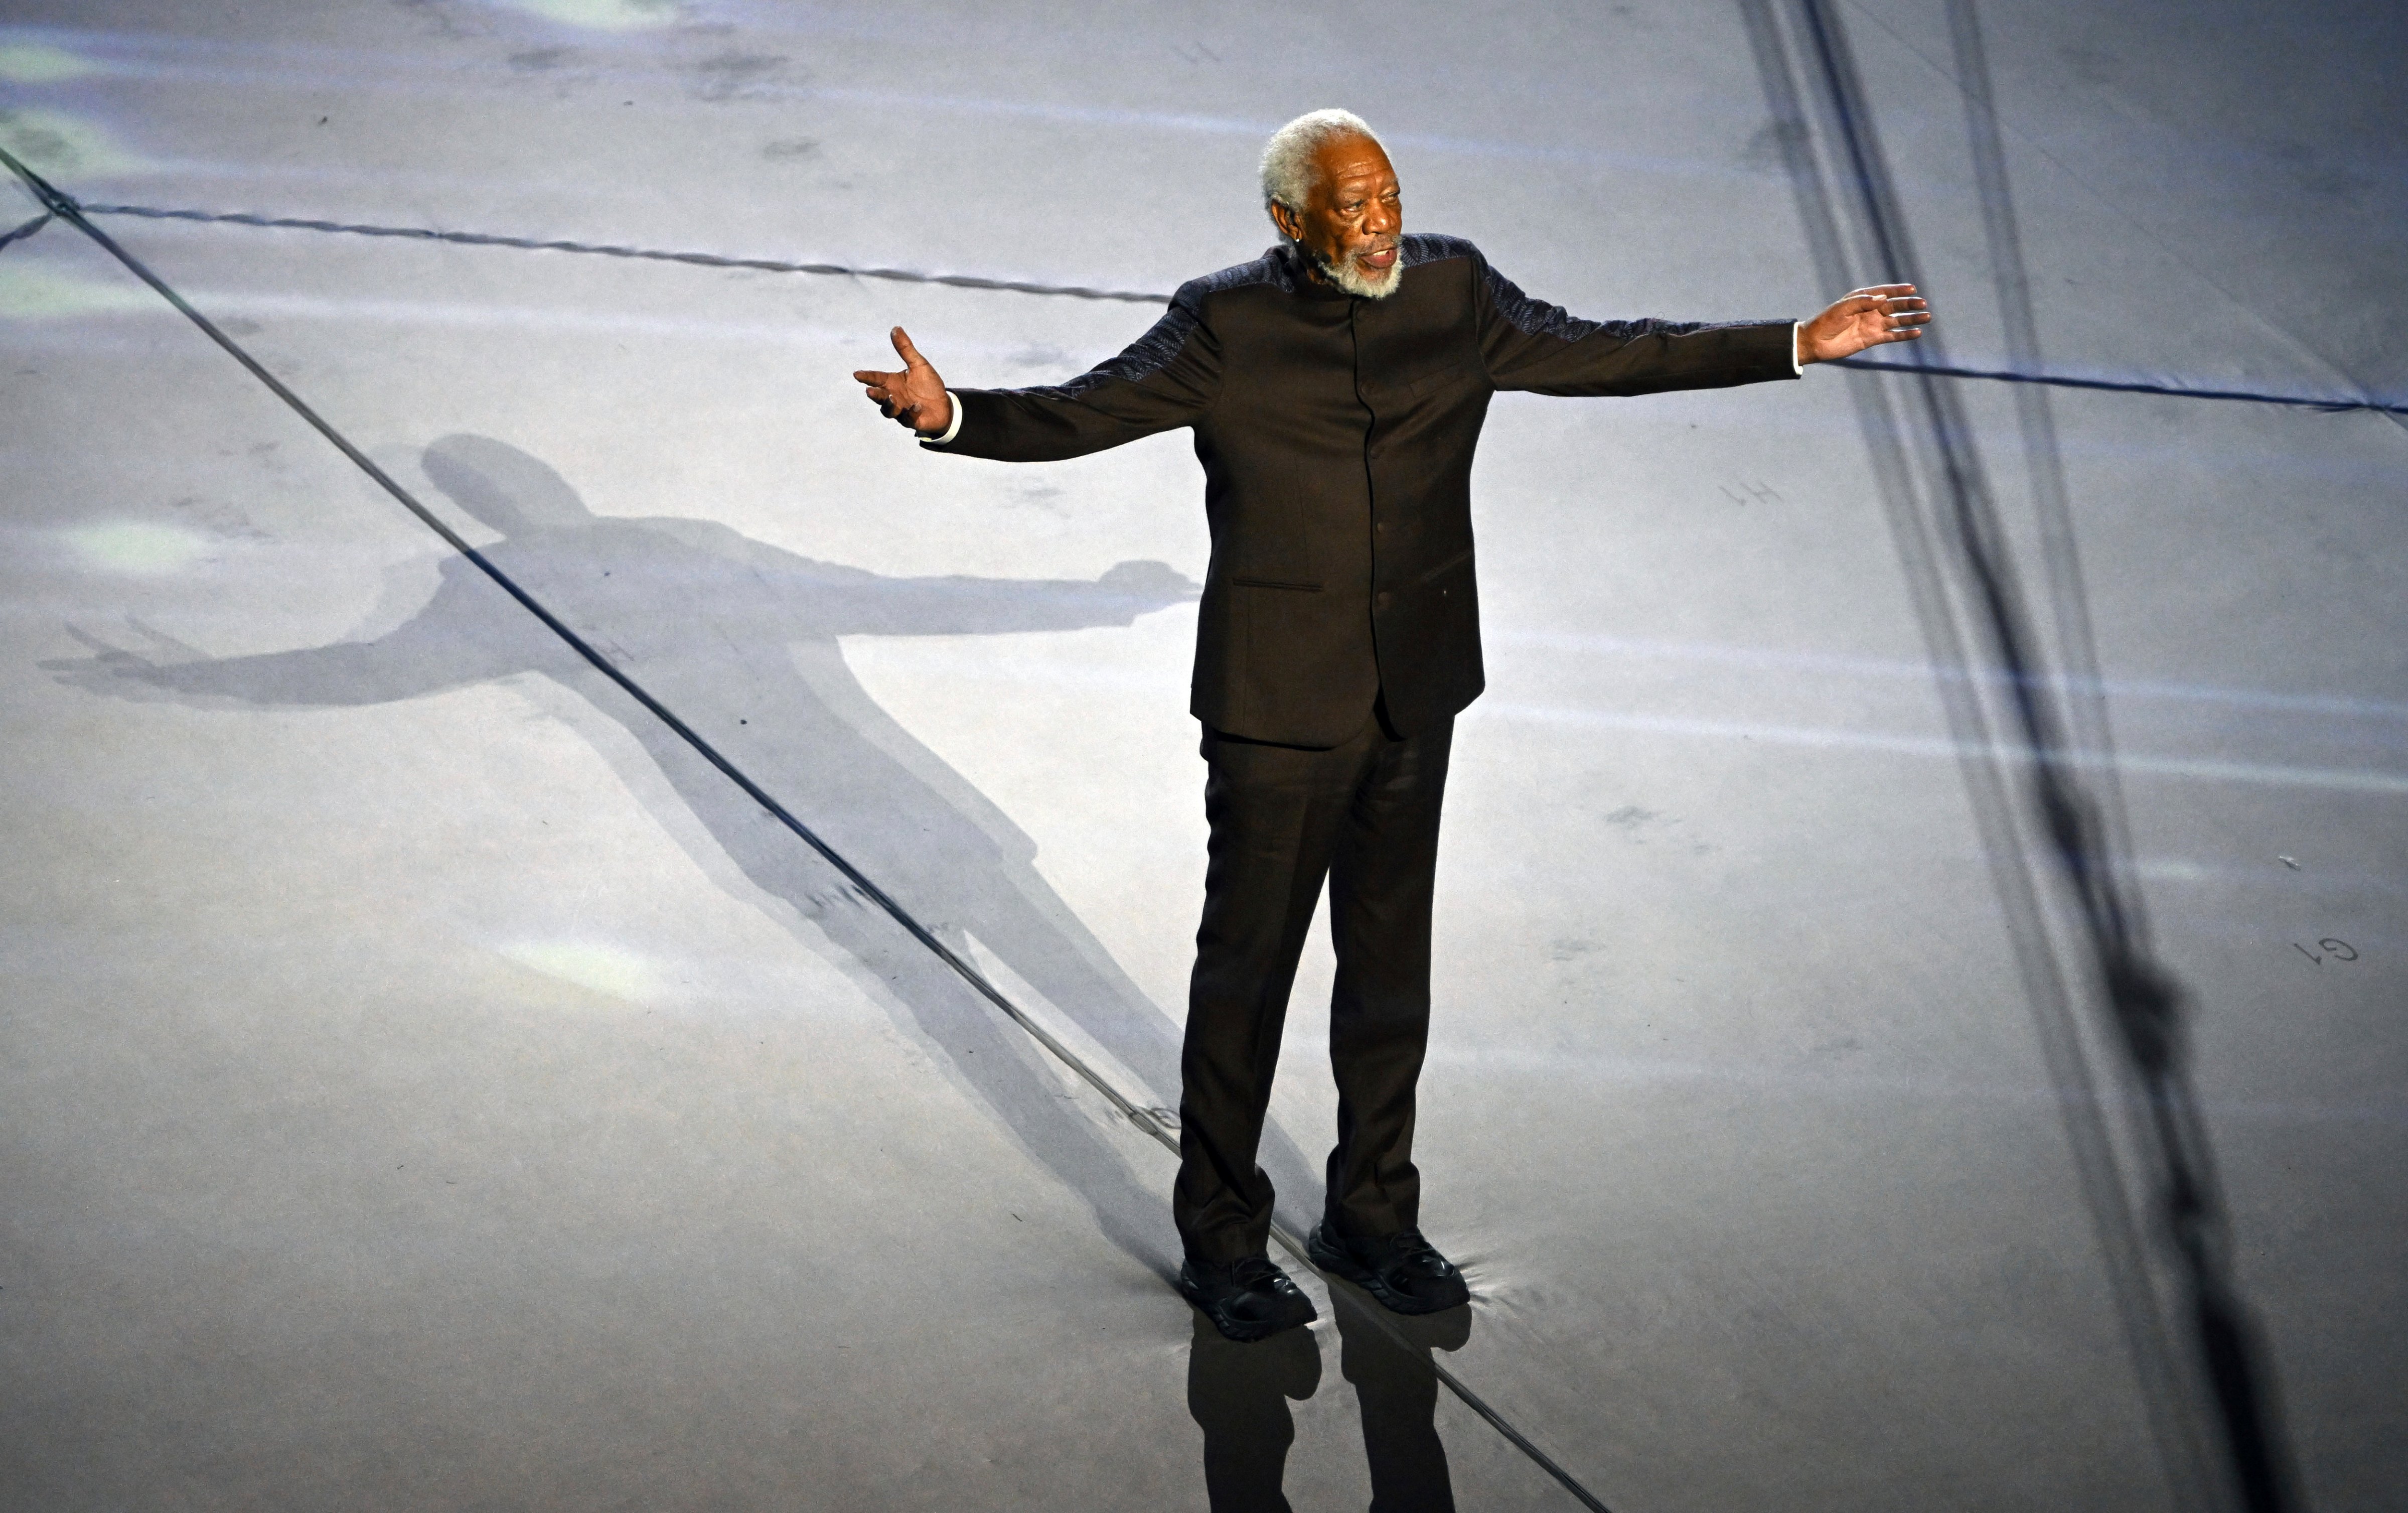 Hollywood actor Morgan Freeman performs during the World Cup opening ceremony in Qatar, Nov. 20, 2022. (Robert Michael—picture-alliance/dpa/AP Images)